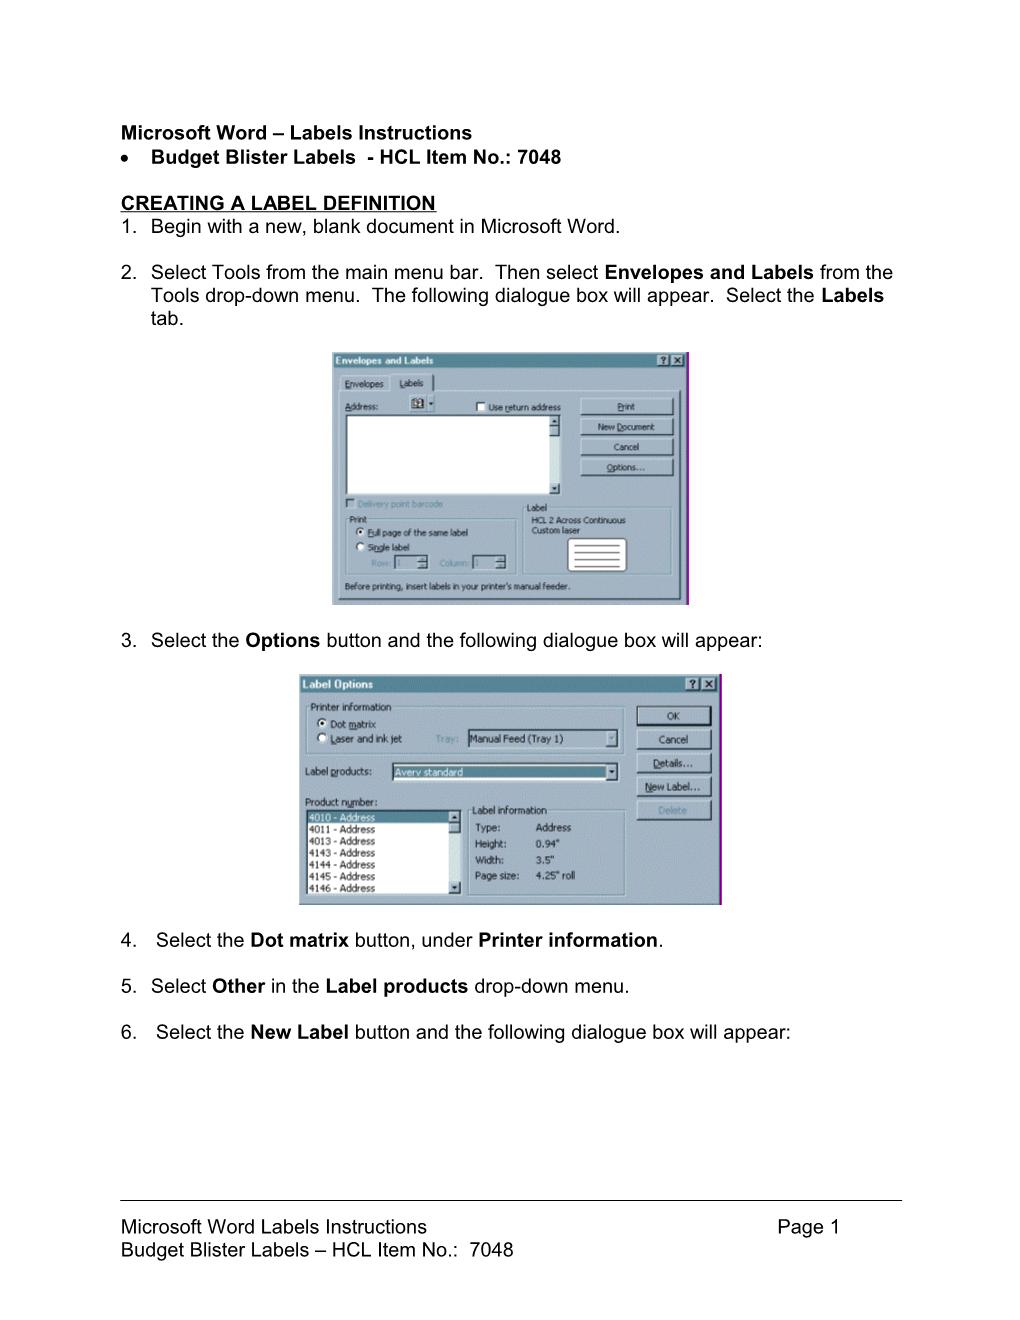 Microsoft Word Labels Instructions